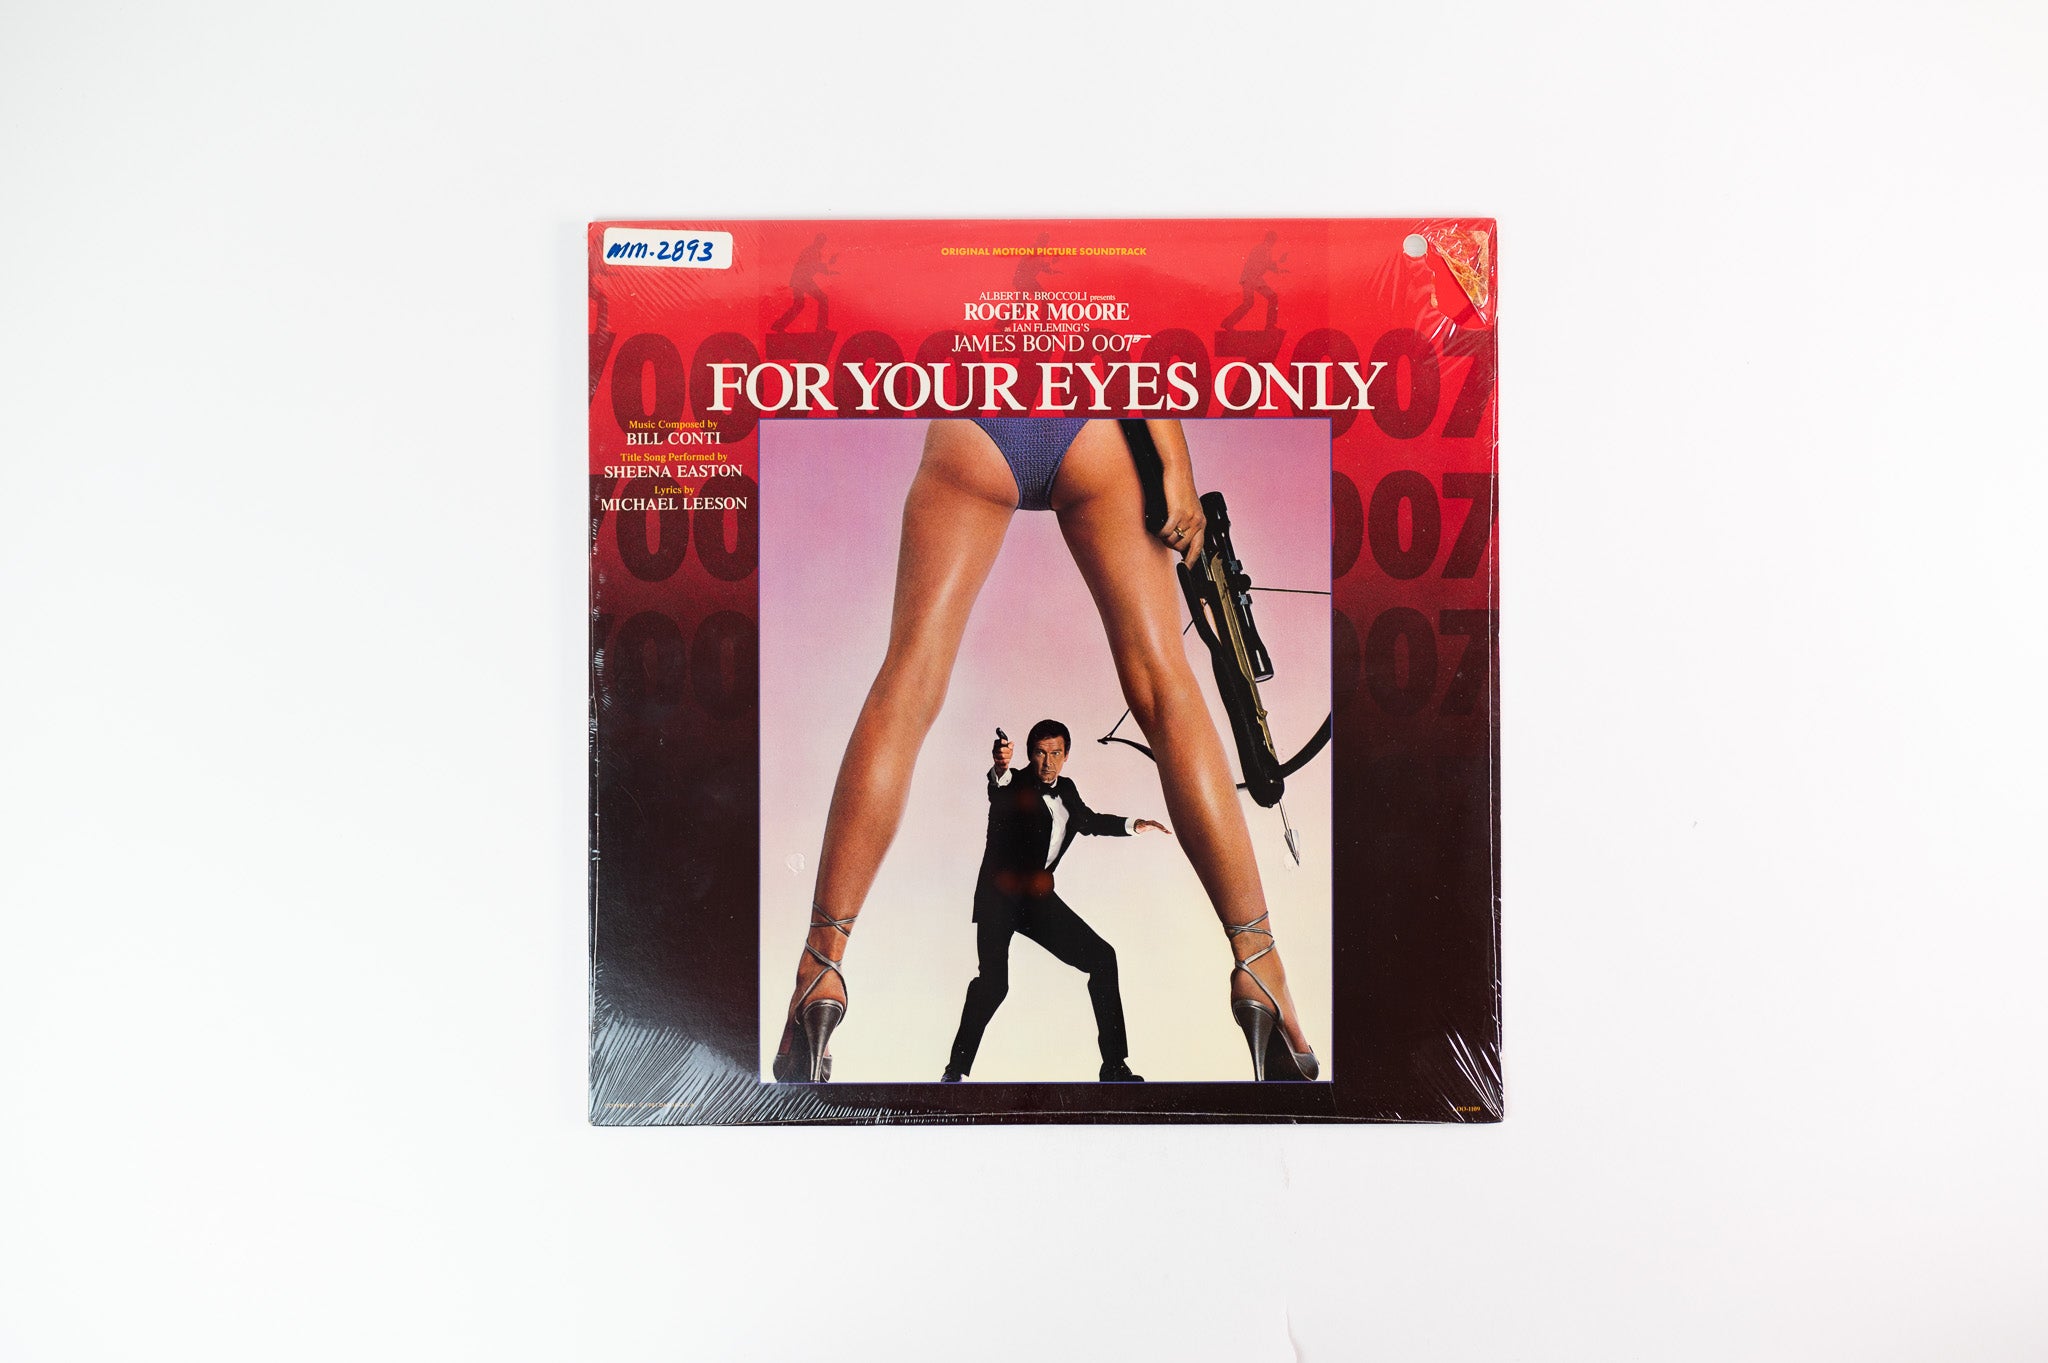 Bill Conti - For Your Eyes Only (Original Motion Picture Soundtrack) on Liberty Sealed